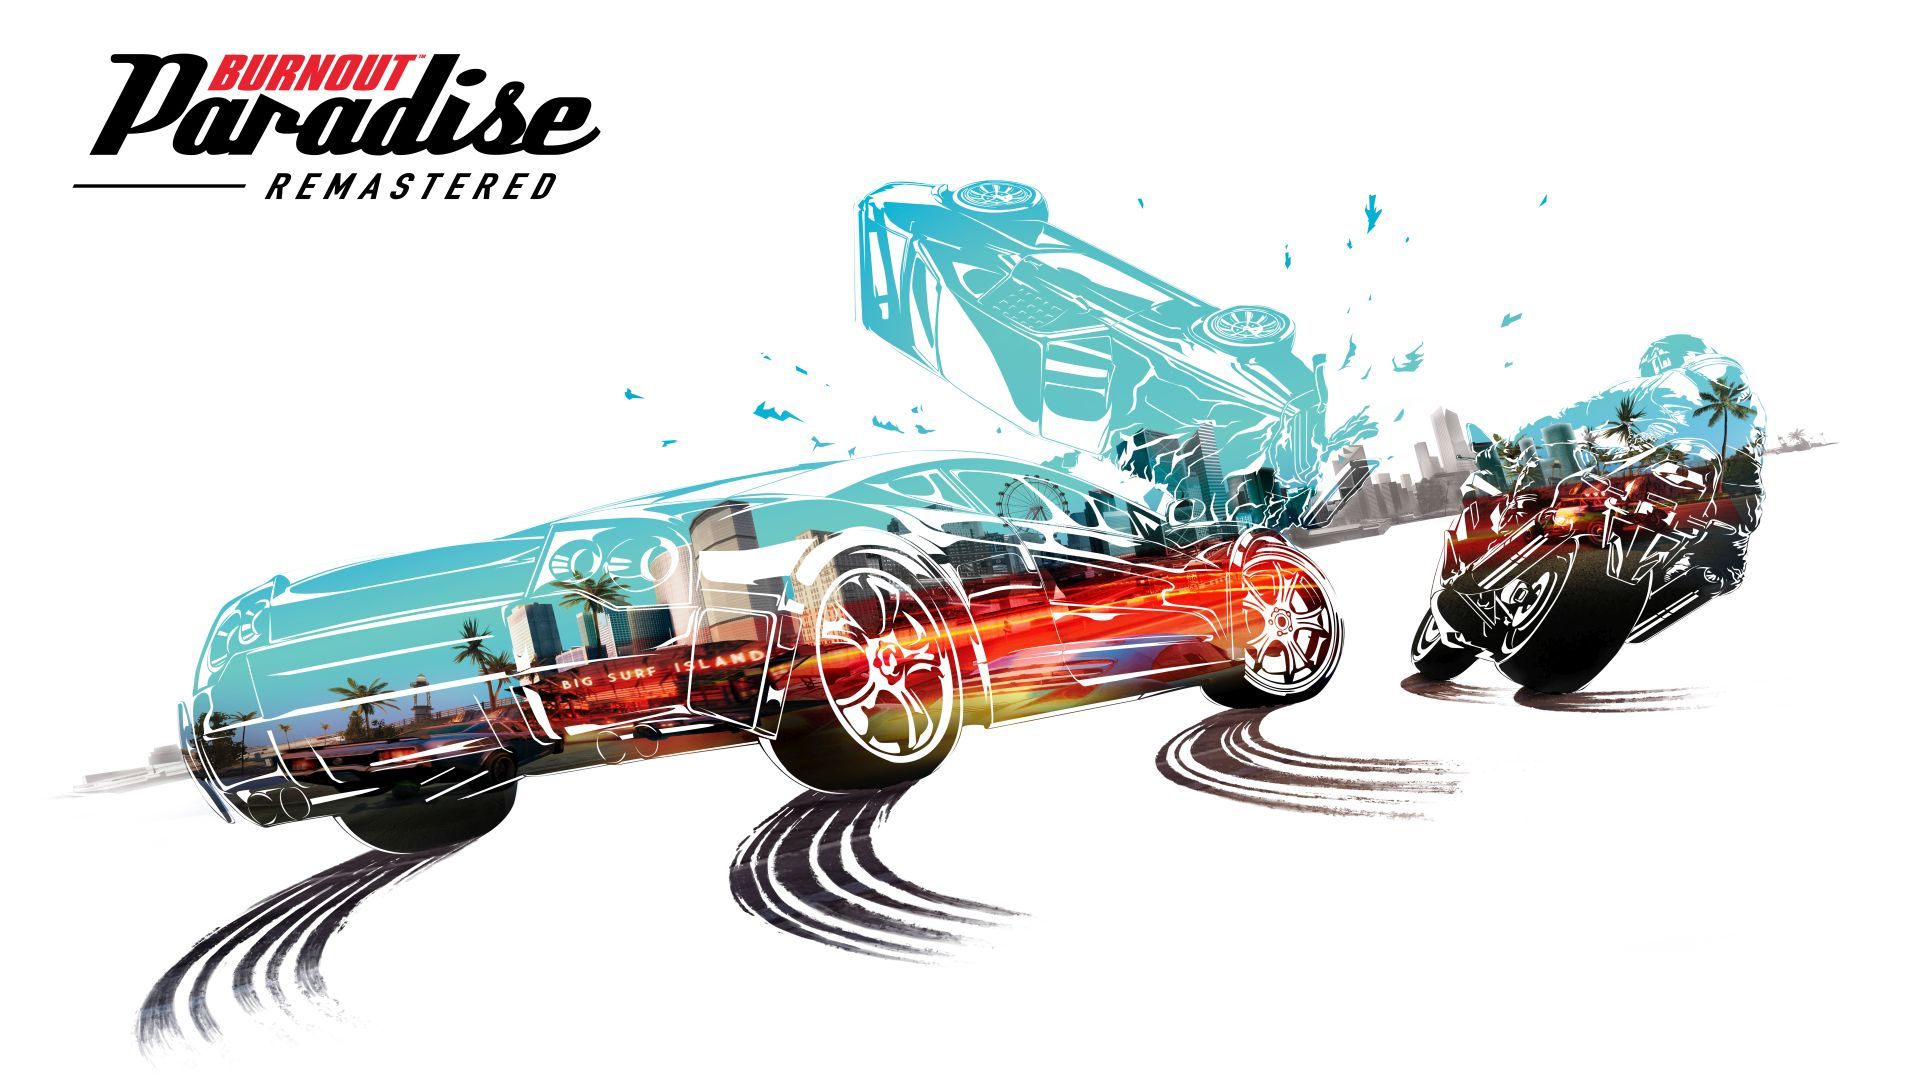 Burnout Paradise Returns! Remastered Edition To Run 4K At 60FPS On